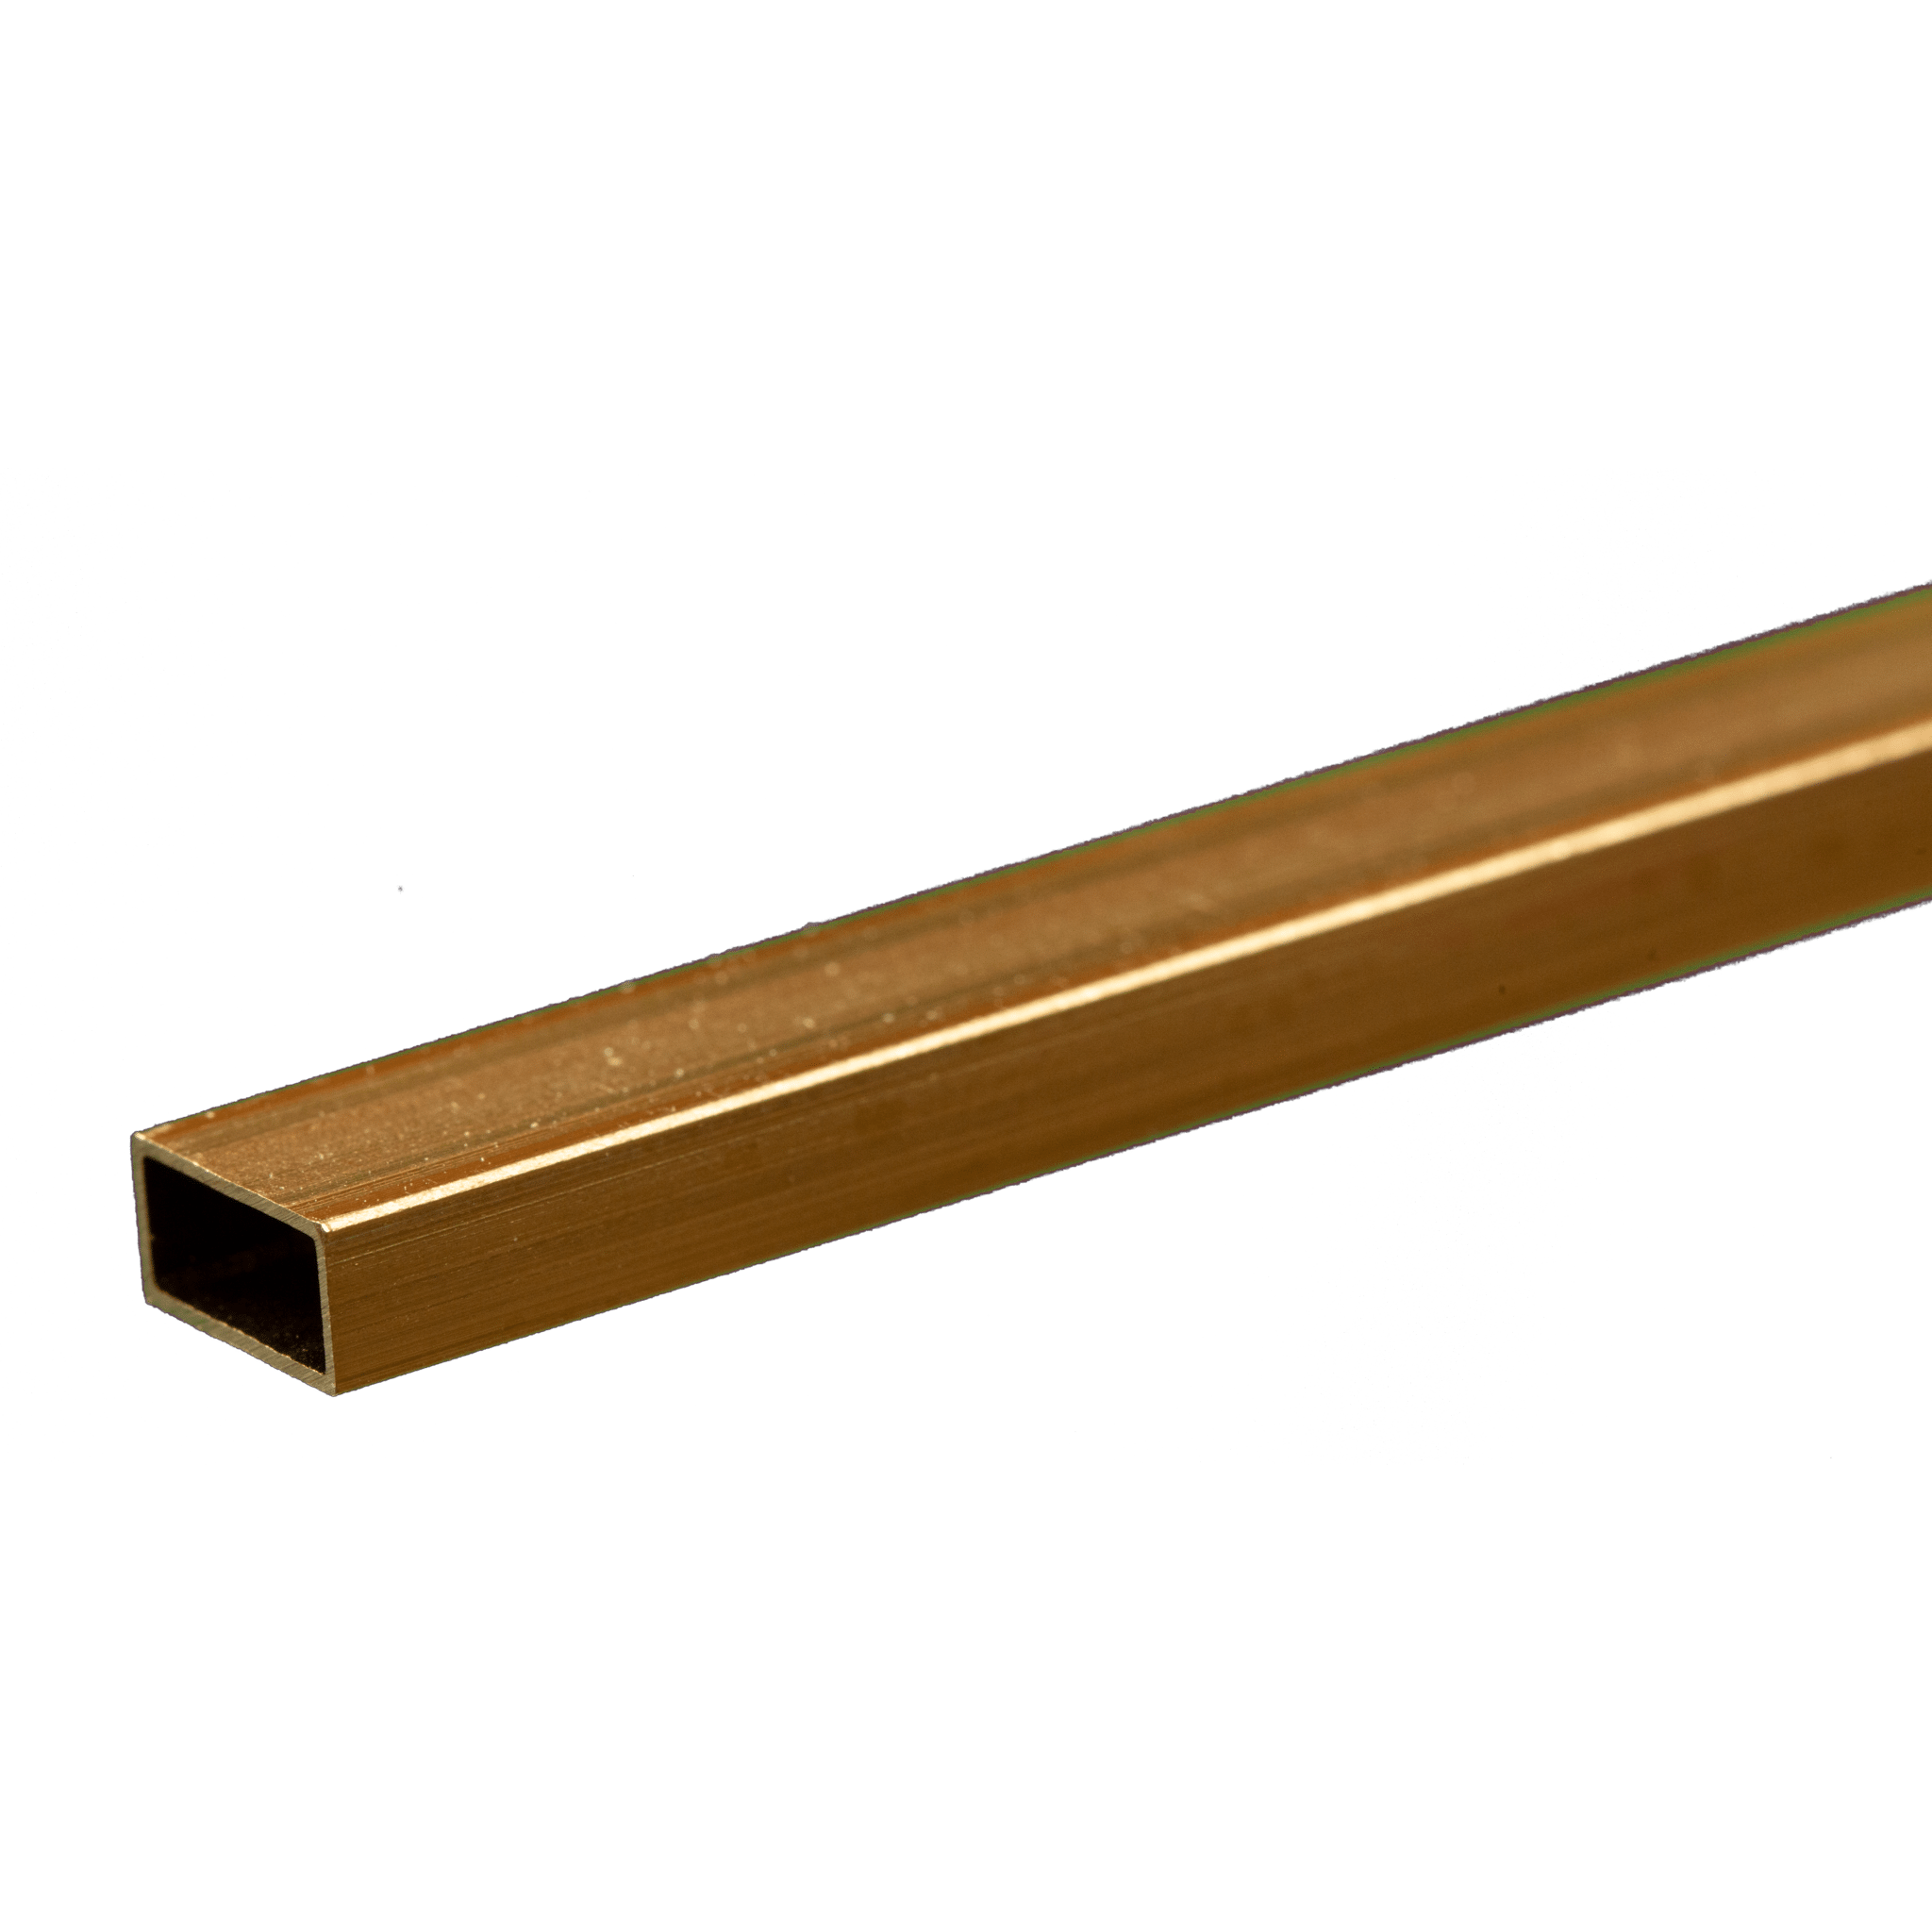 K&S 1146 Round Brass Tube, 5/32 OD x 0.014 Wall x 36 Long, 5 Pieces,  Made in The USA: Industrial Metal Tubing: : Industrial &  Scientific